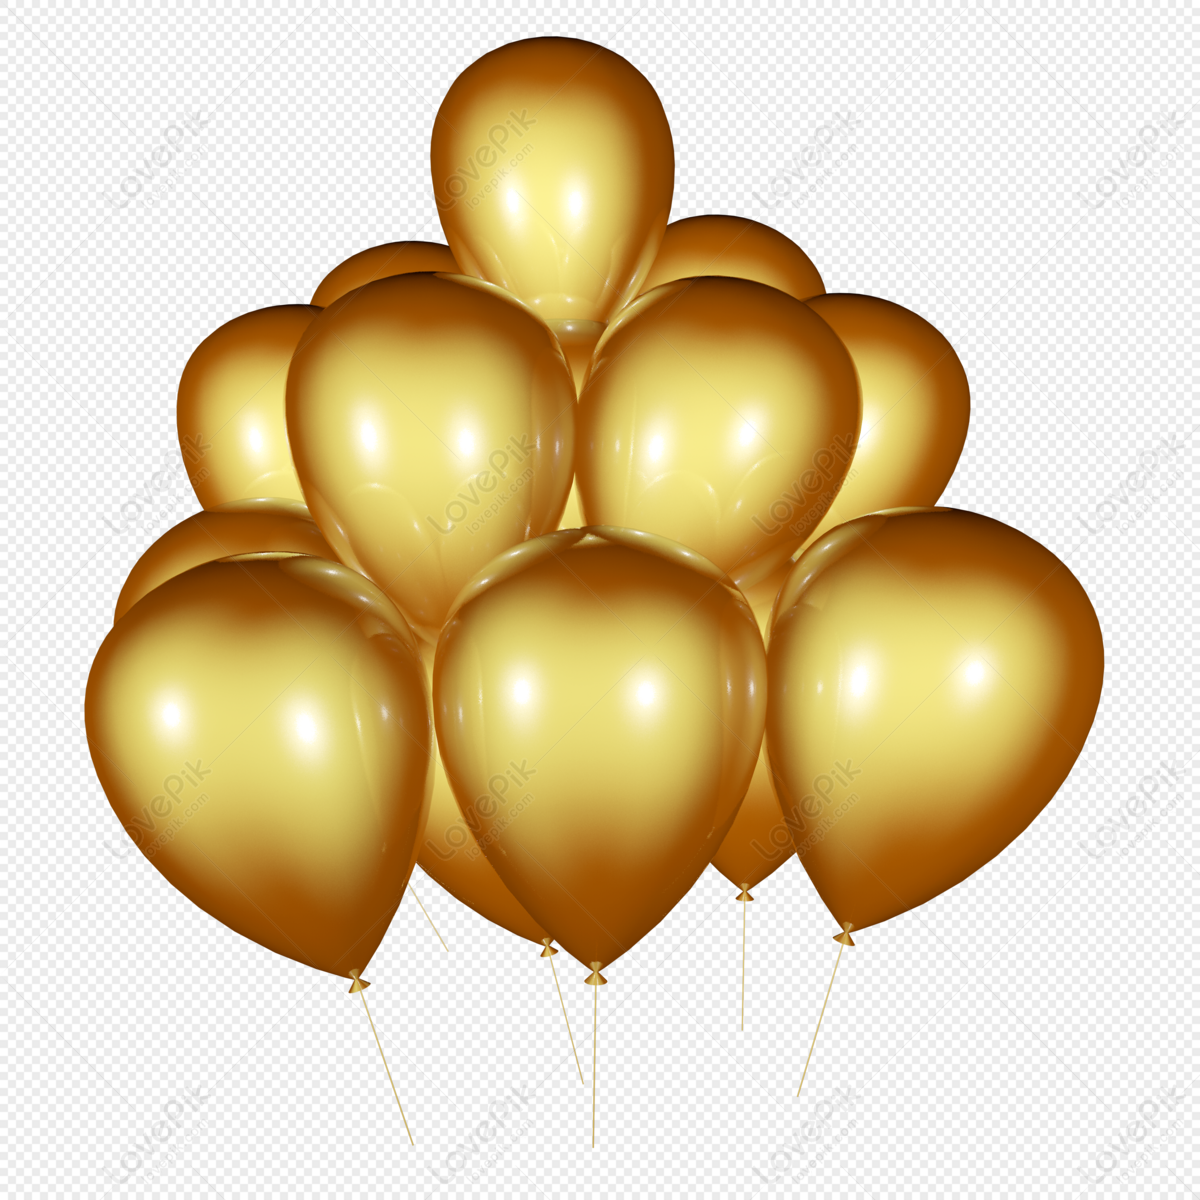 Details 100 gold balloons background - Abzlocal.mx